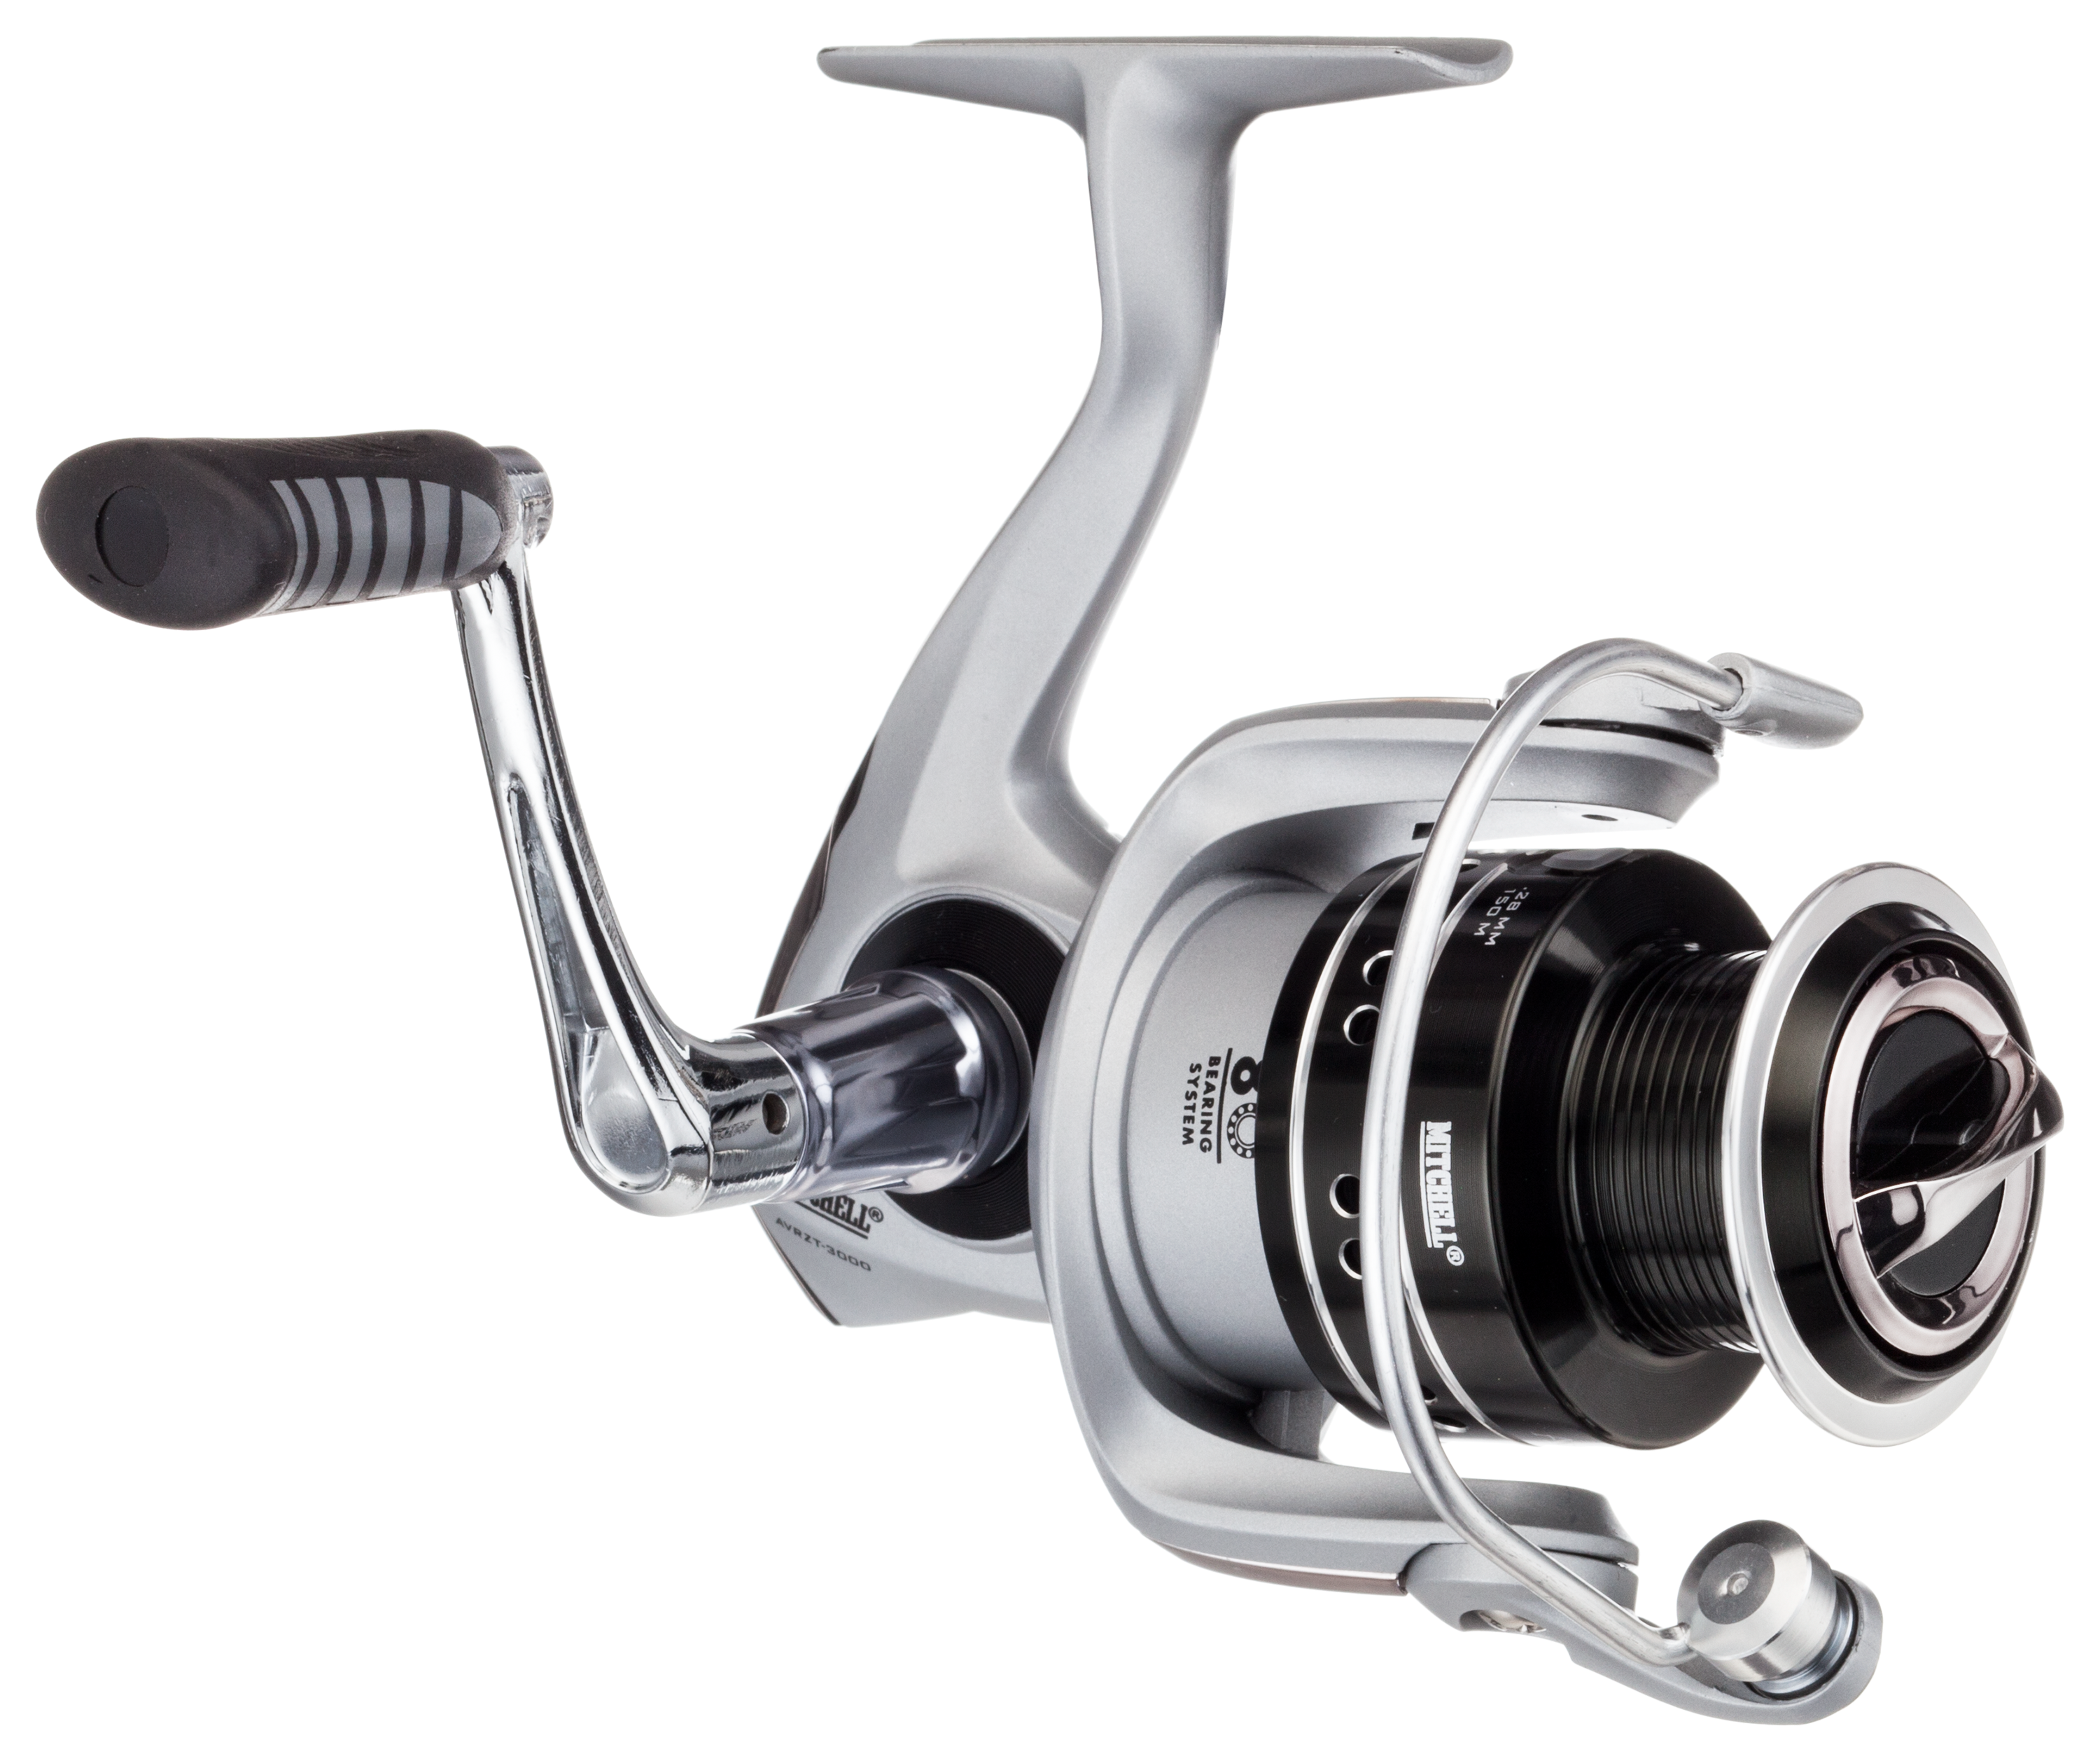 Mitchell Avocet S2000 spinning fishing reel for Sale in Peoria, AZ